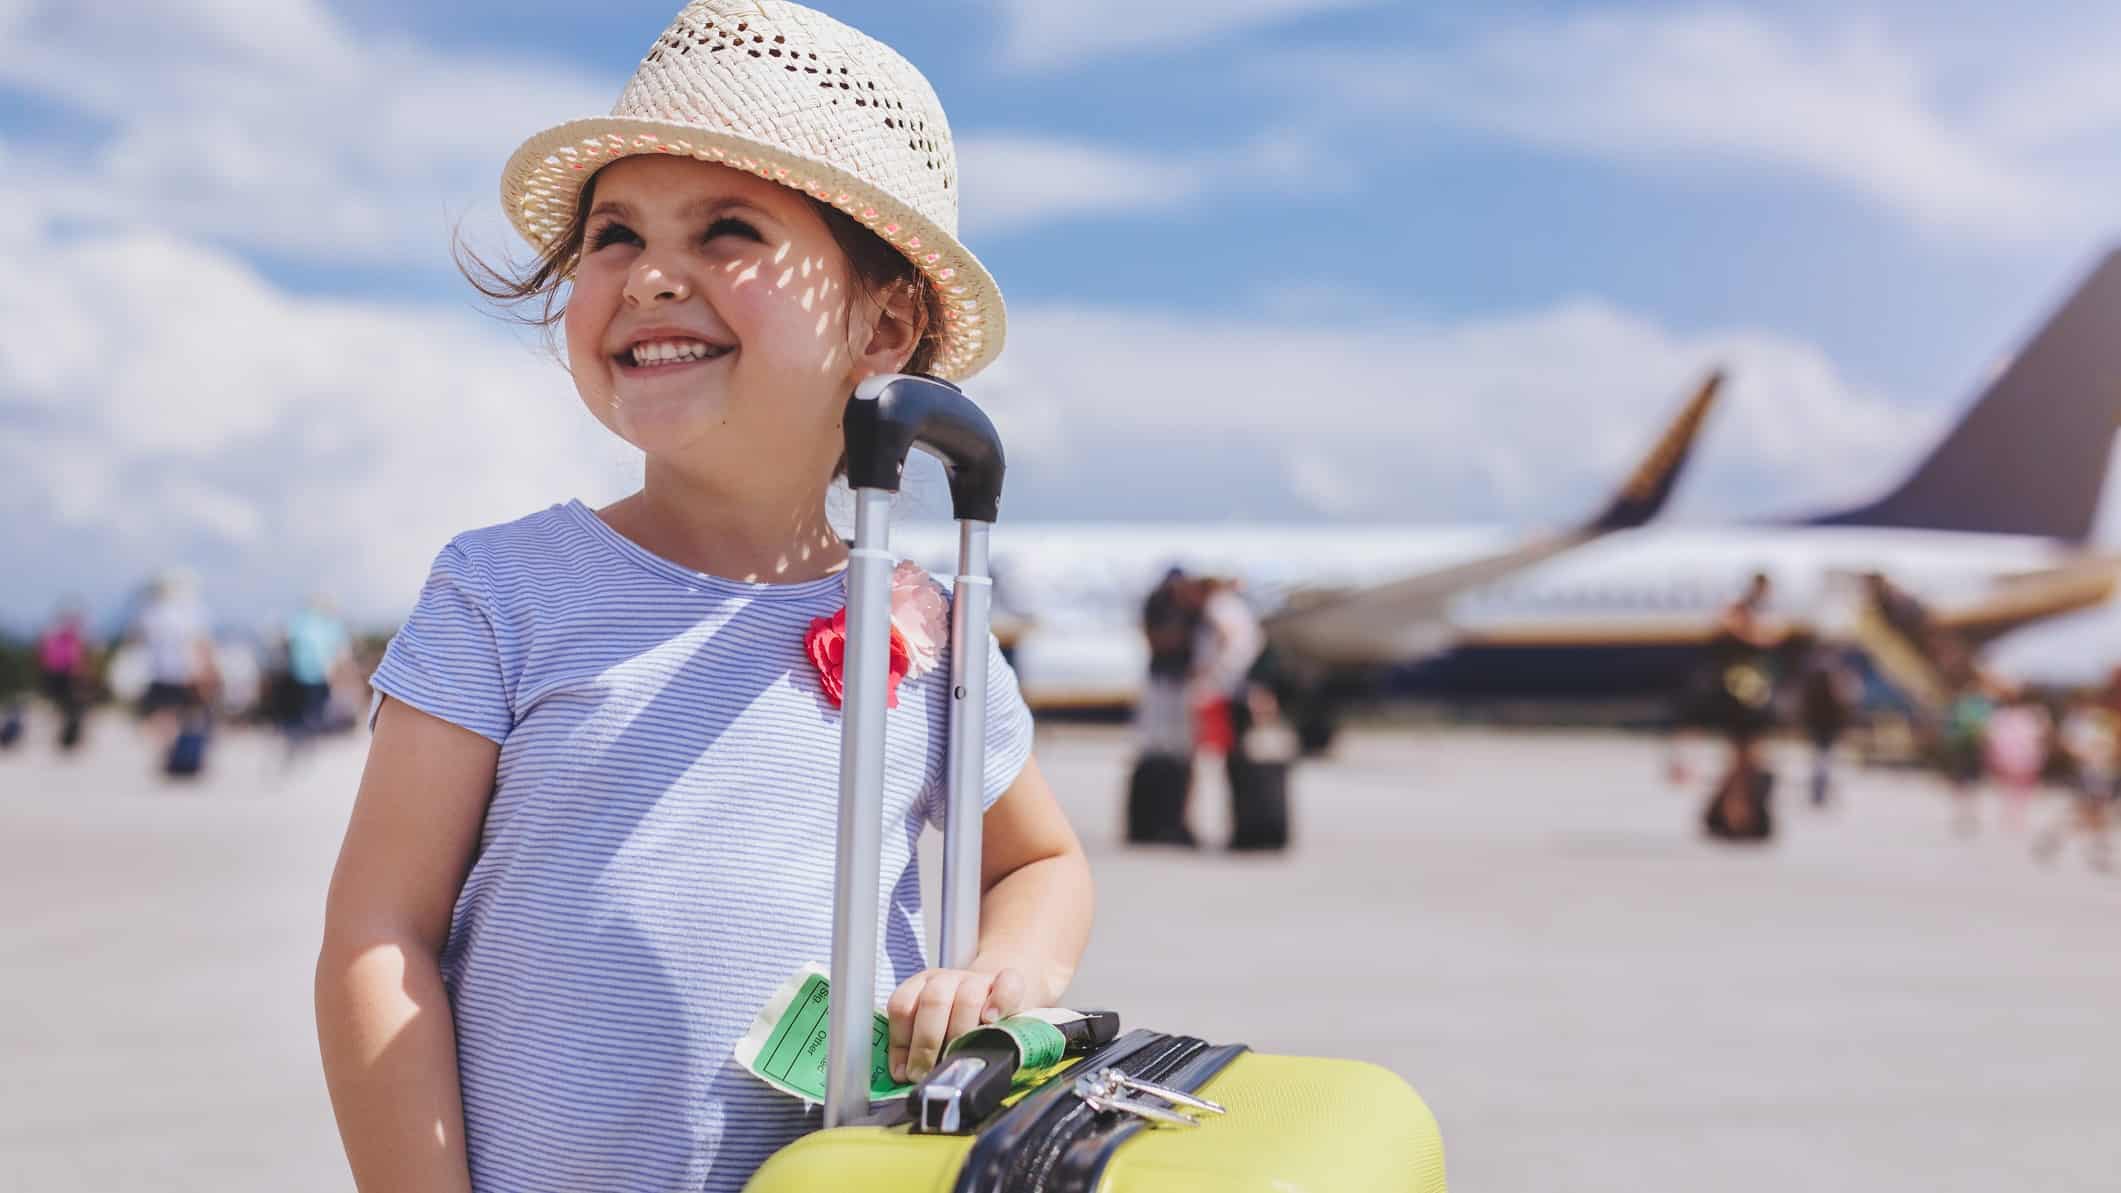 Young girl smiles with her hand on top of a suitcase while standing on the tarmac with an aeroplane in the background.